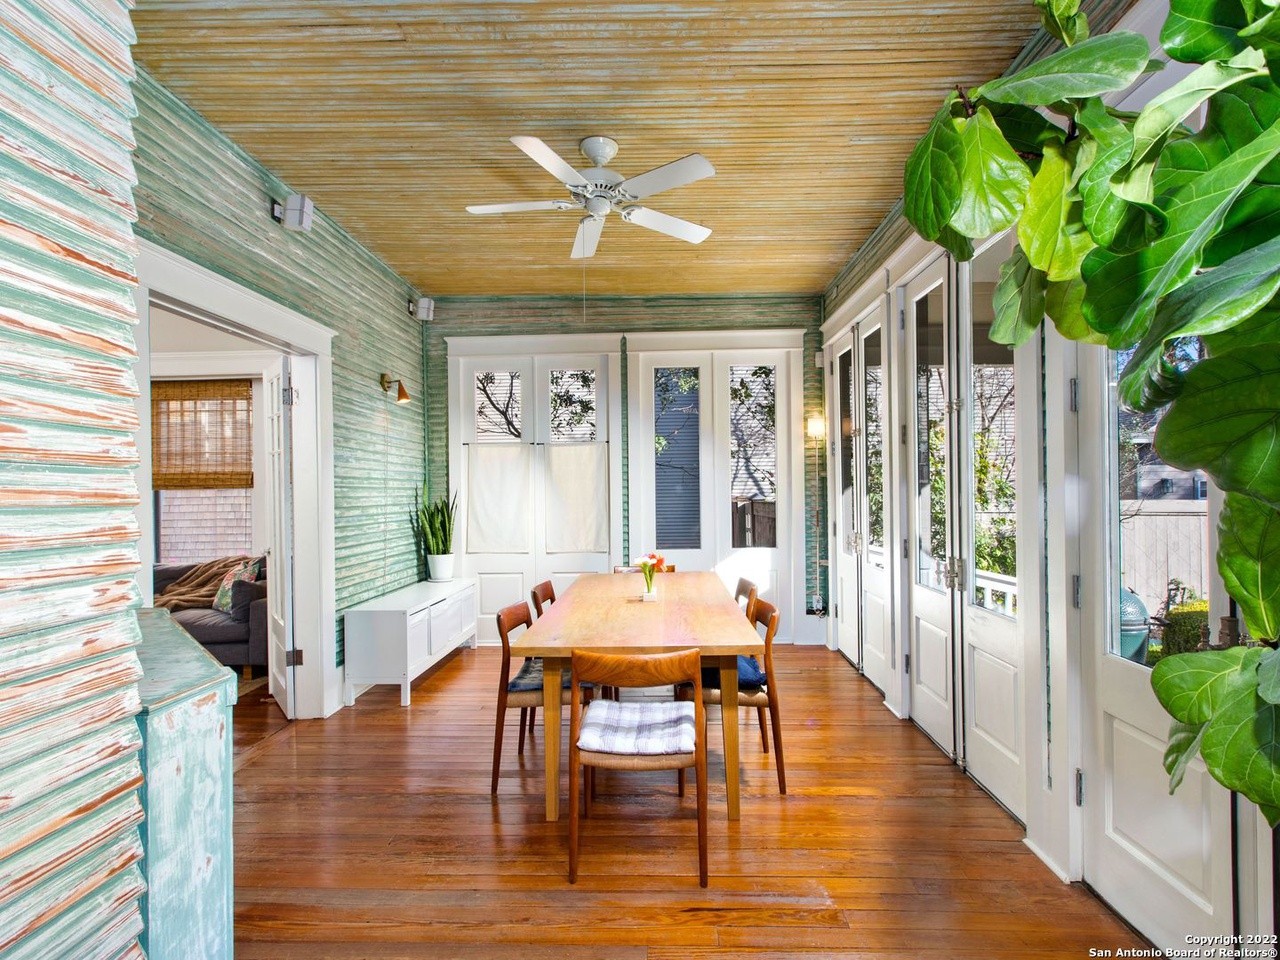 This restored 1913 San Antonio home includes a dining area that opens into a sunroom